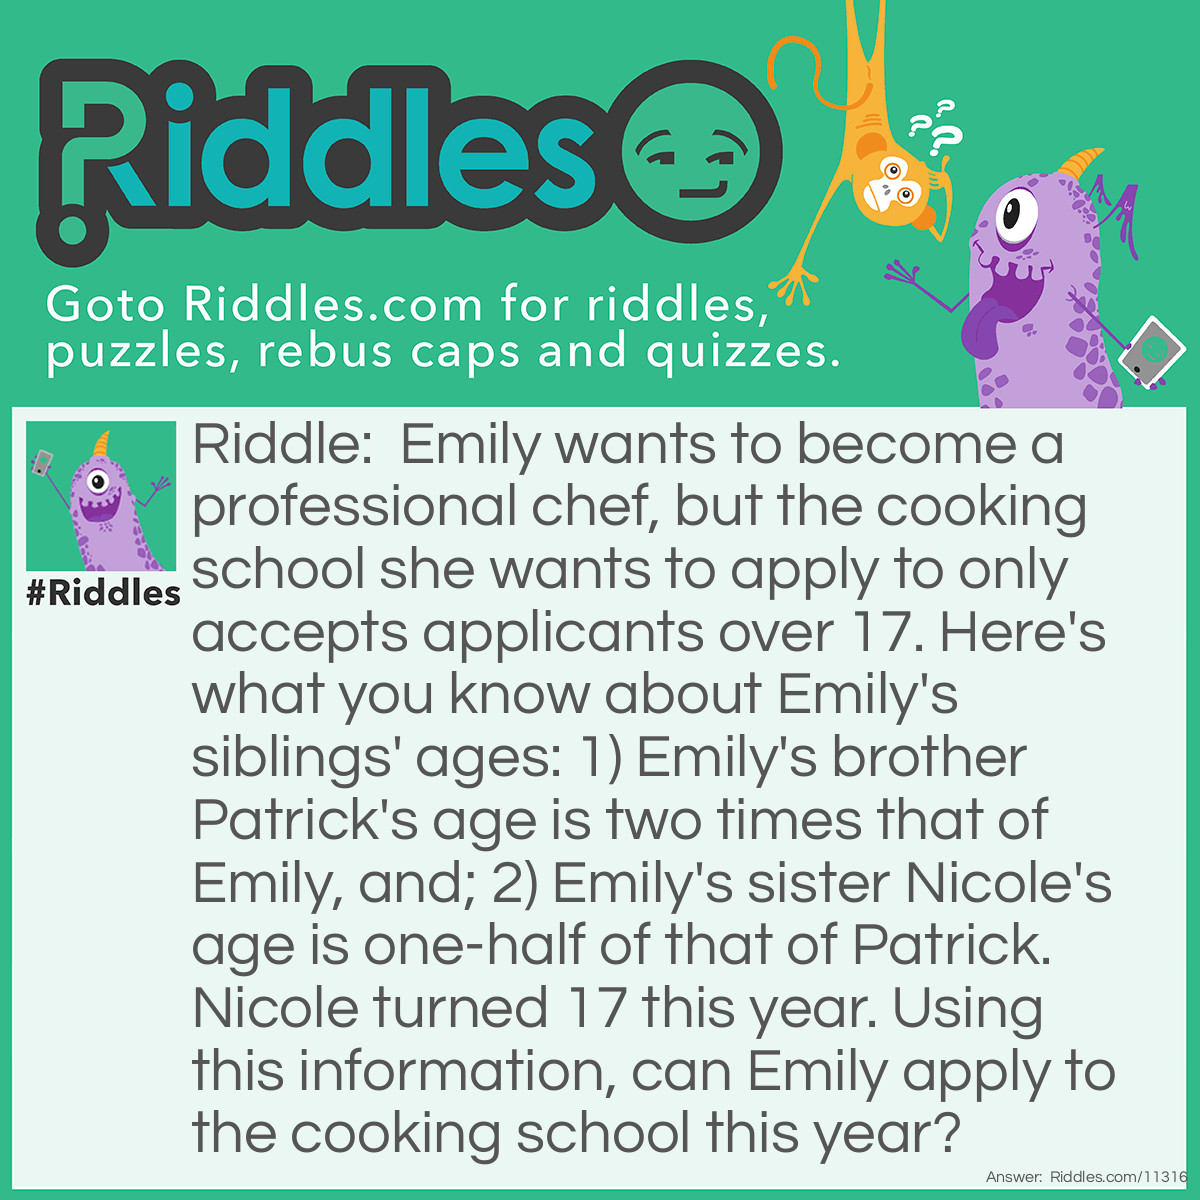 Riddle: Emily wants to become a professional chef, but the cooking school she wants to apply to only accepts applicants over 17. Here's what you know about Emily's siblings' ages: 1) Emily's brother Patrick's age is two times that of Emily, and; 2) Emily's sister Nicole's age is one-half of that of Patrick. Nicole turned 17 this year. Using this information, can Emily apply to the cooking school this year? Answer: No, she cannot. If Nicole is 17, and her age is one-half of that of Patrick, then Patrick must be two times Nicole's age. Therefore, Patrick is 34. If Patrick is 34, and his age is two times that of Emily, then Emily must be one-half of Patrick's age. Therefore, Emily is 17. Emily and Nicole are of the same age because they are twins. However, the cooking school only accepts applicants "over 17", not "17 and over". Therefore, Emily cannot apply to the cooking school this year.